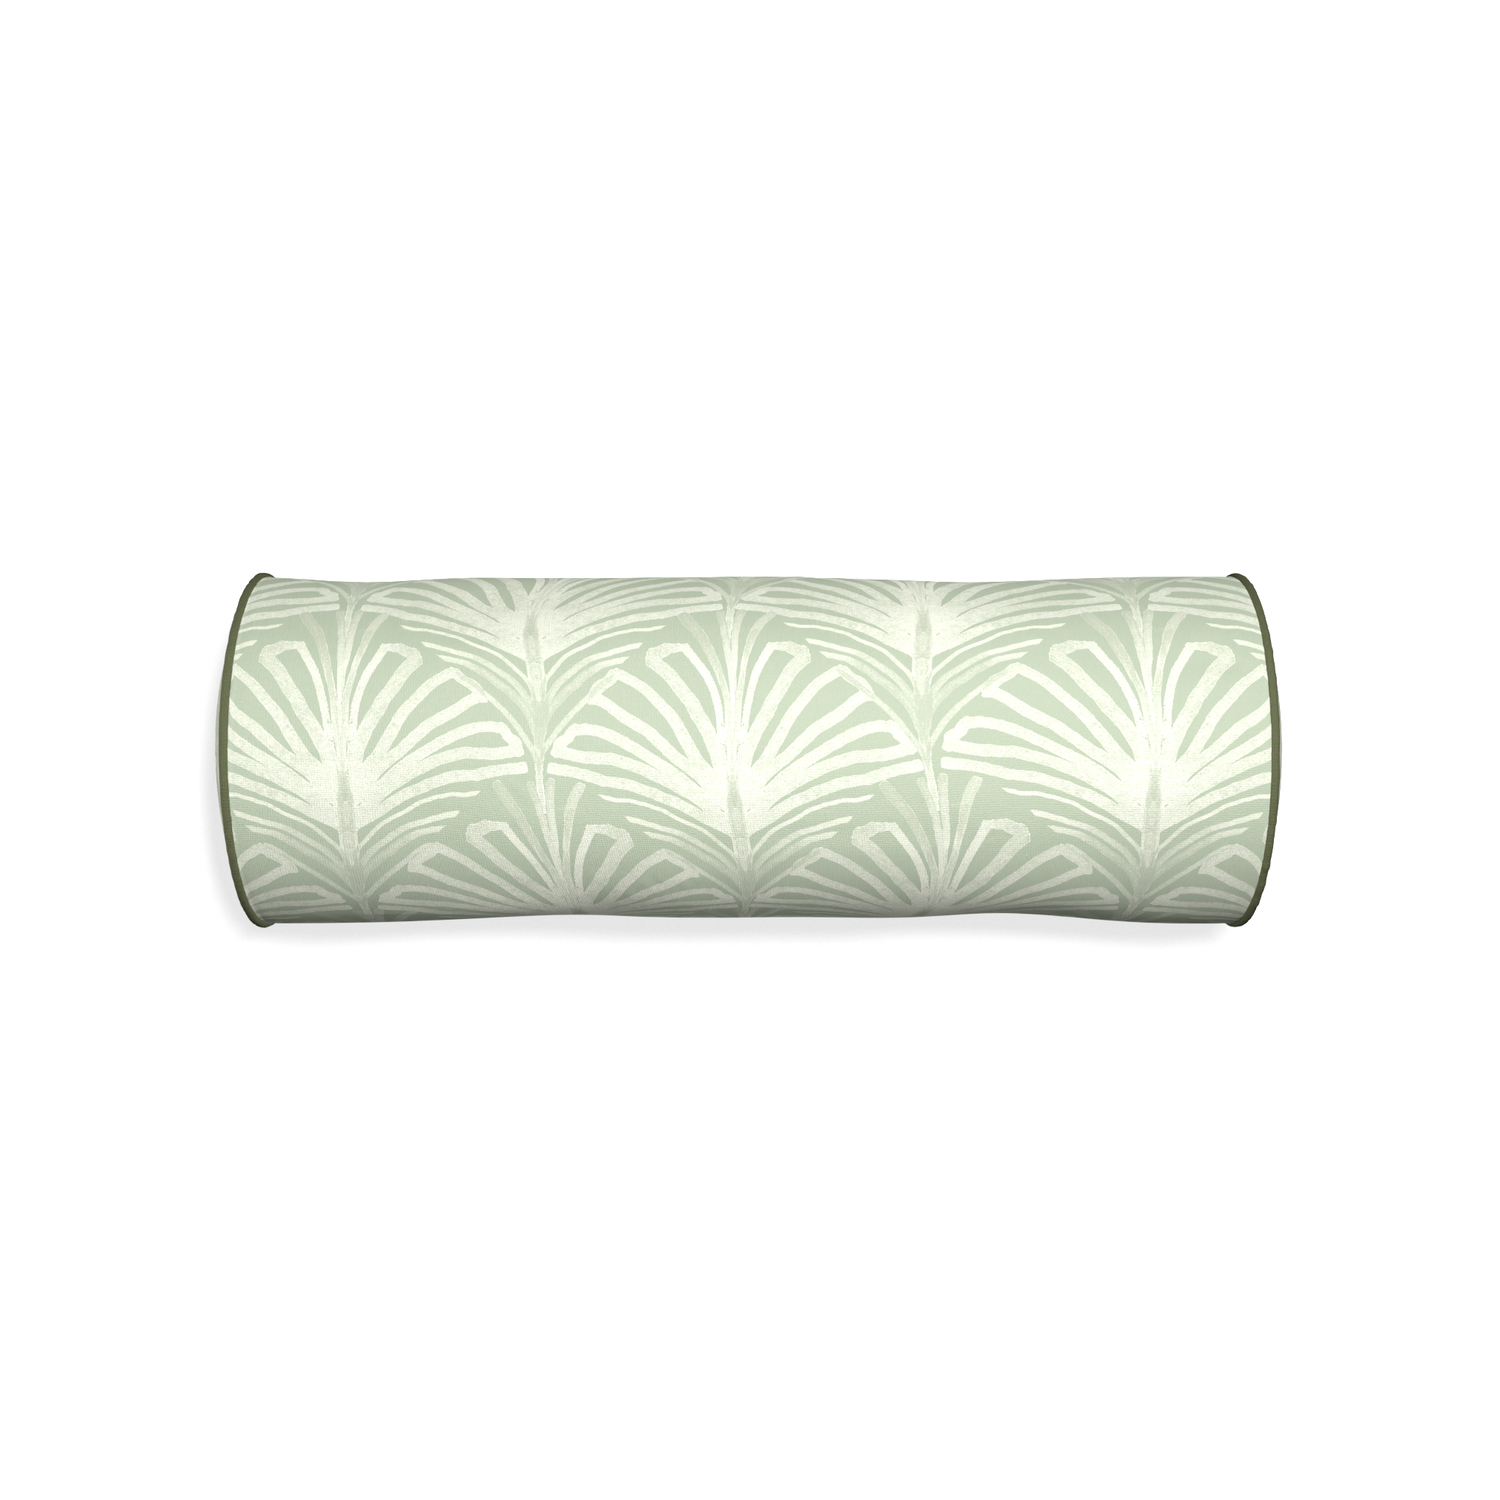 Bolster suzy sage custom sage green palmpillow with f piping on white background